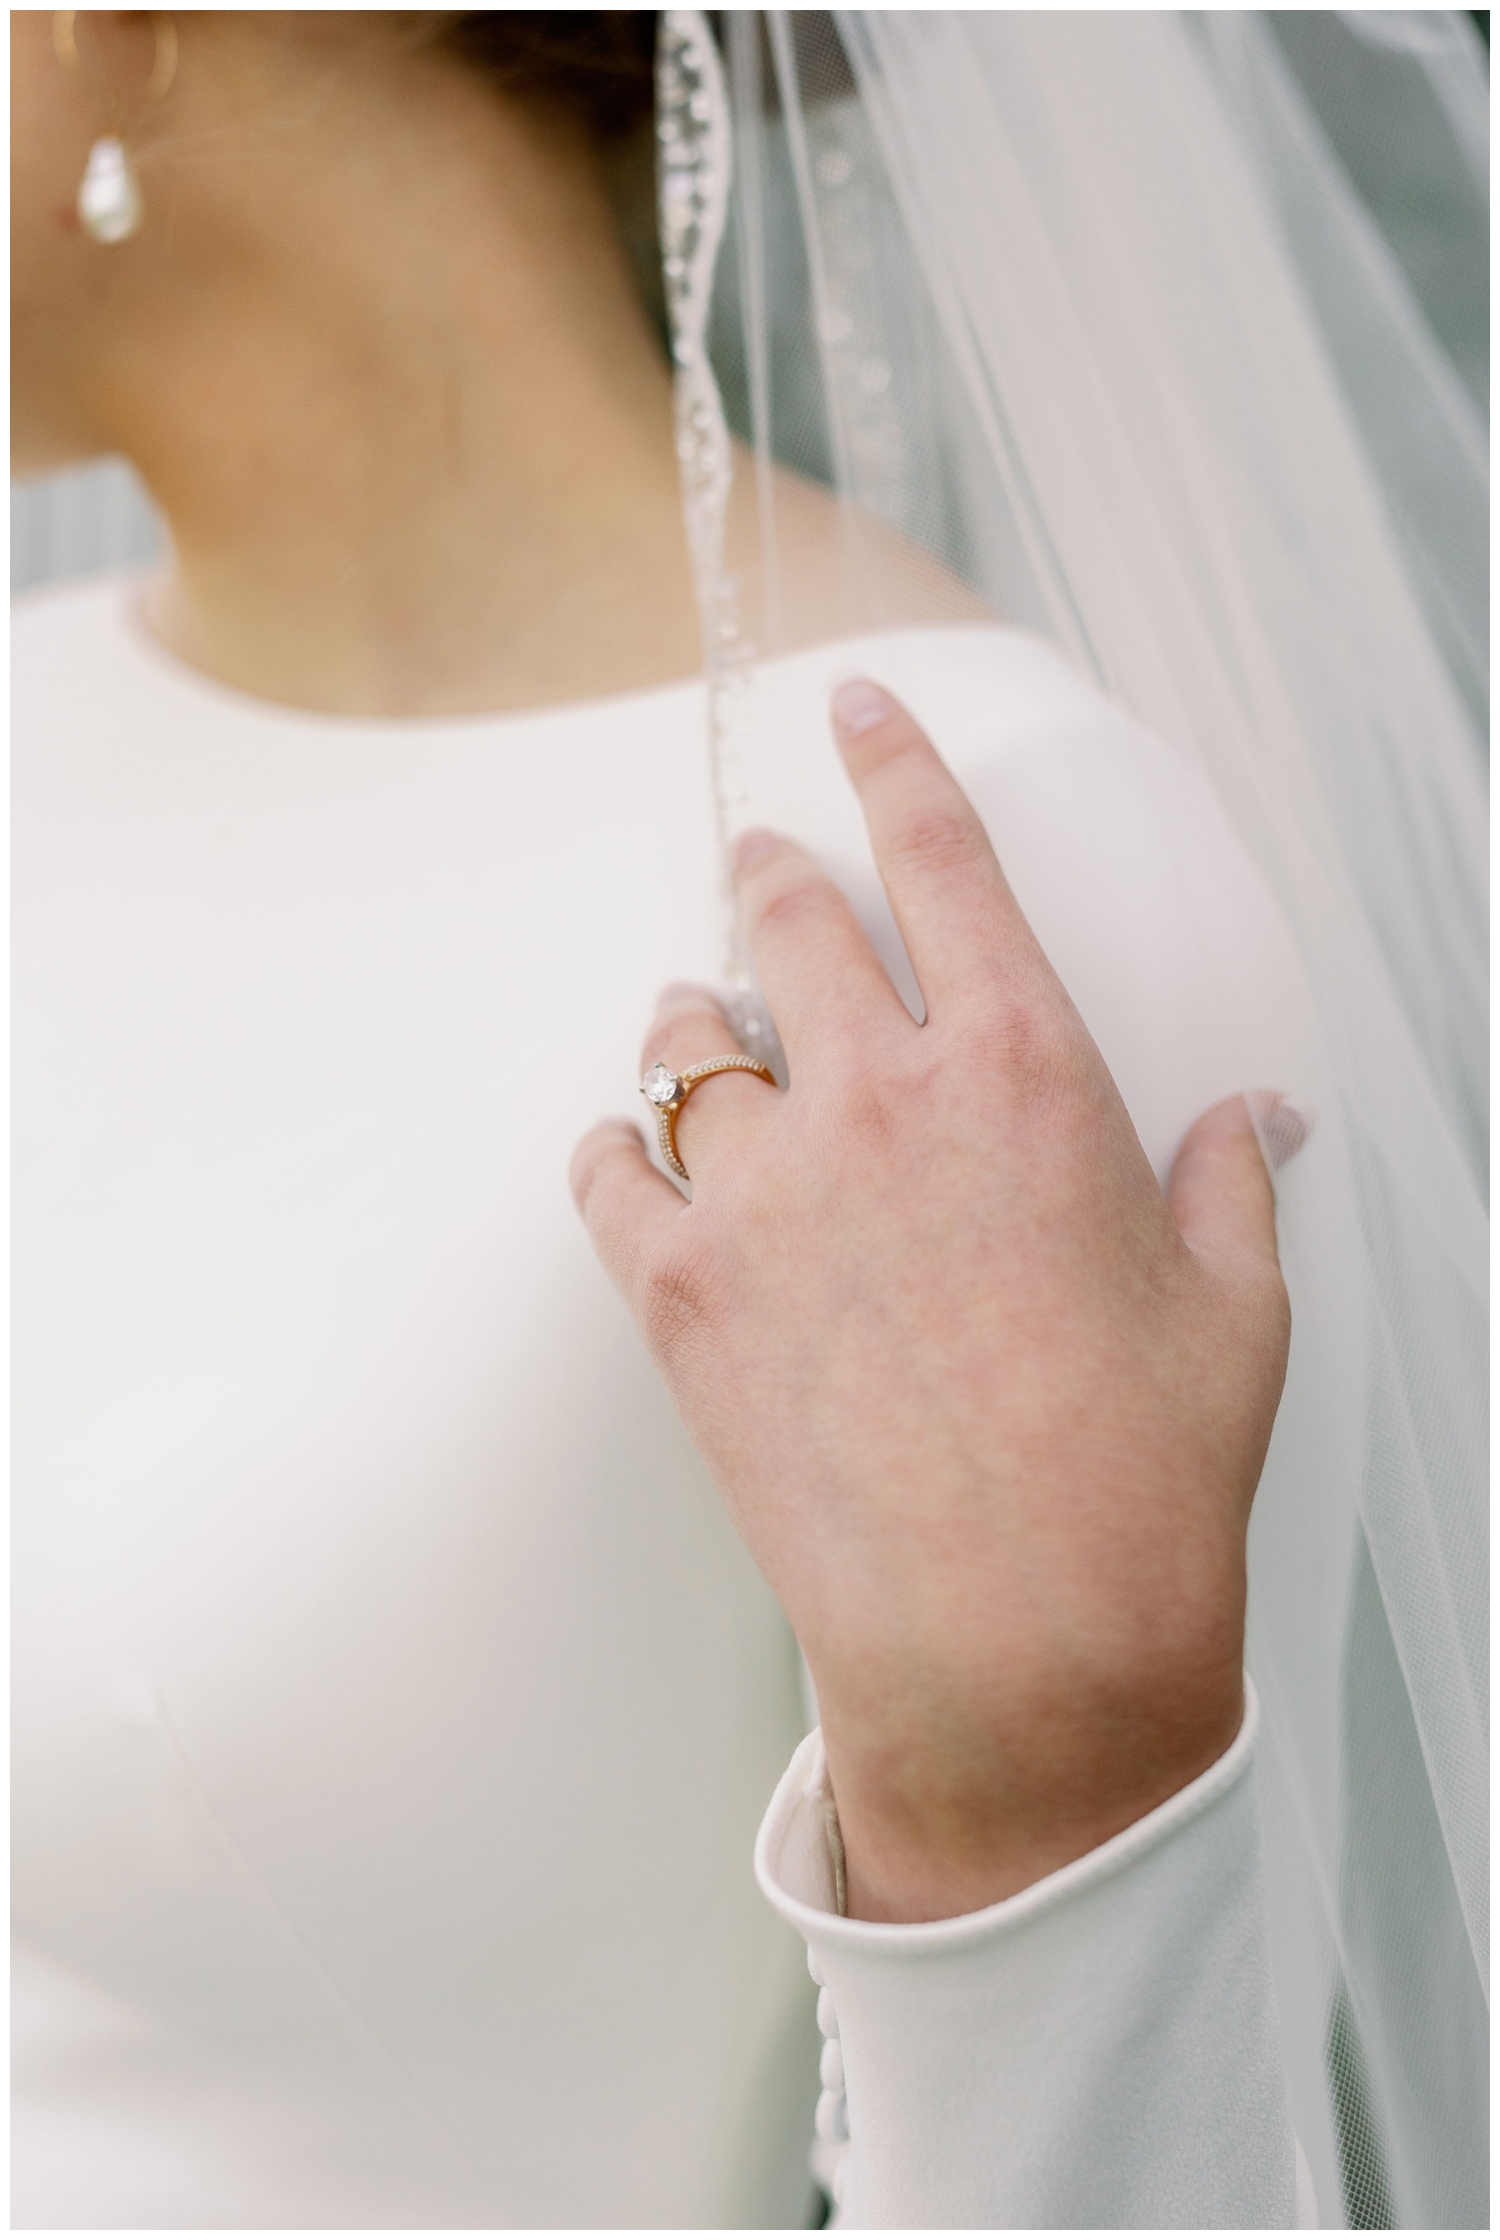 close up image of bride's hand holding her veil with diamond ring